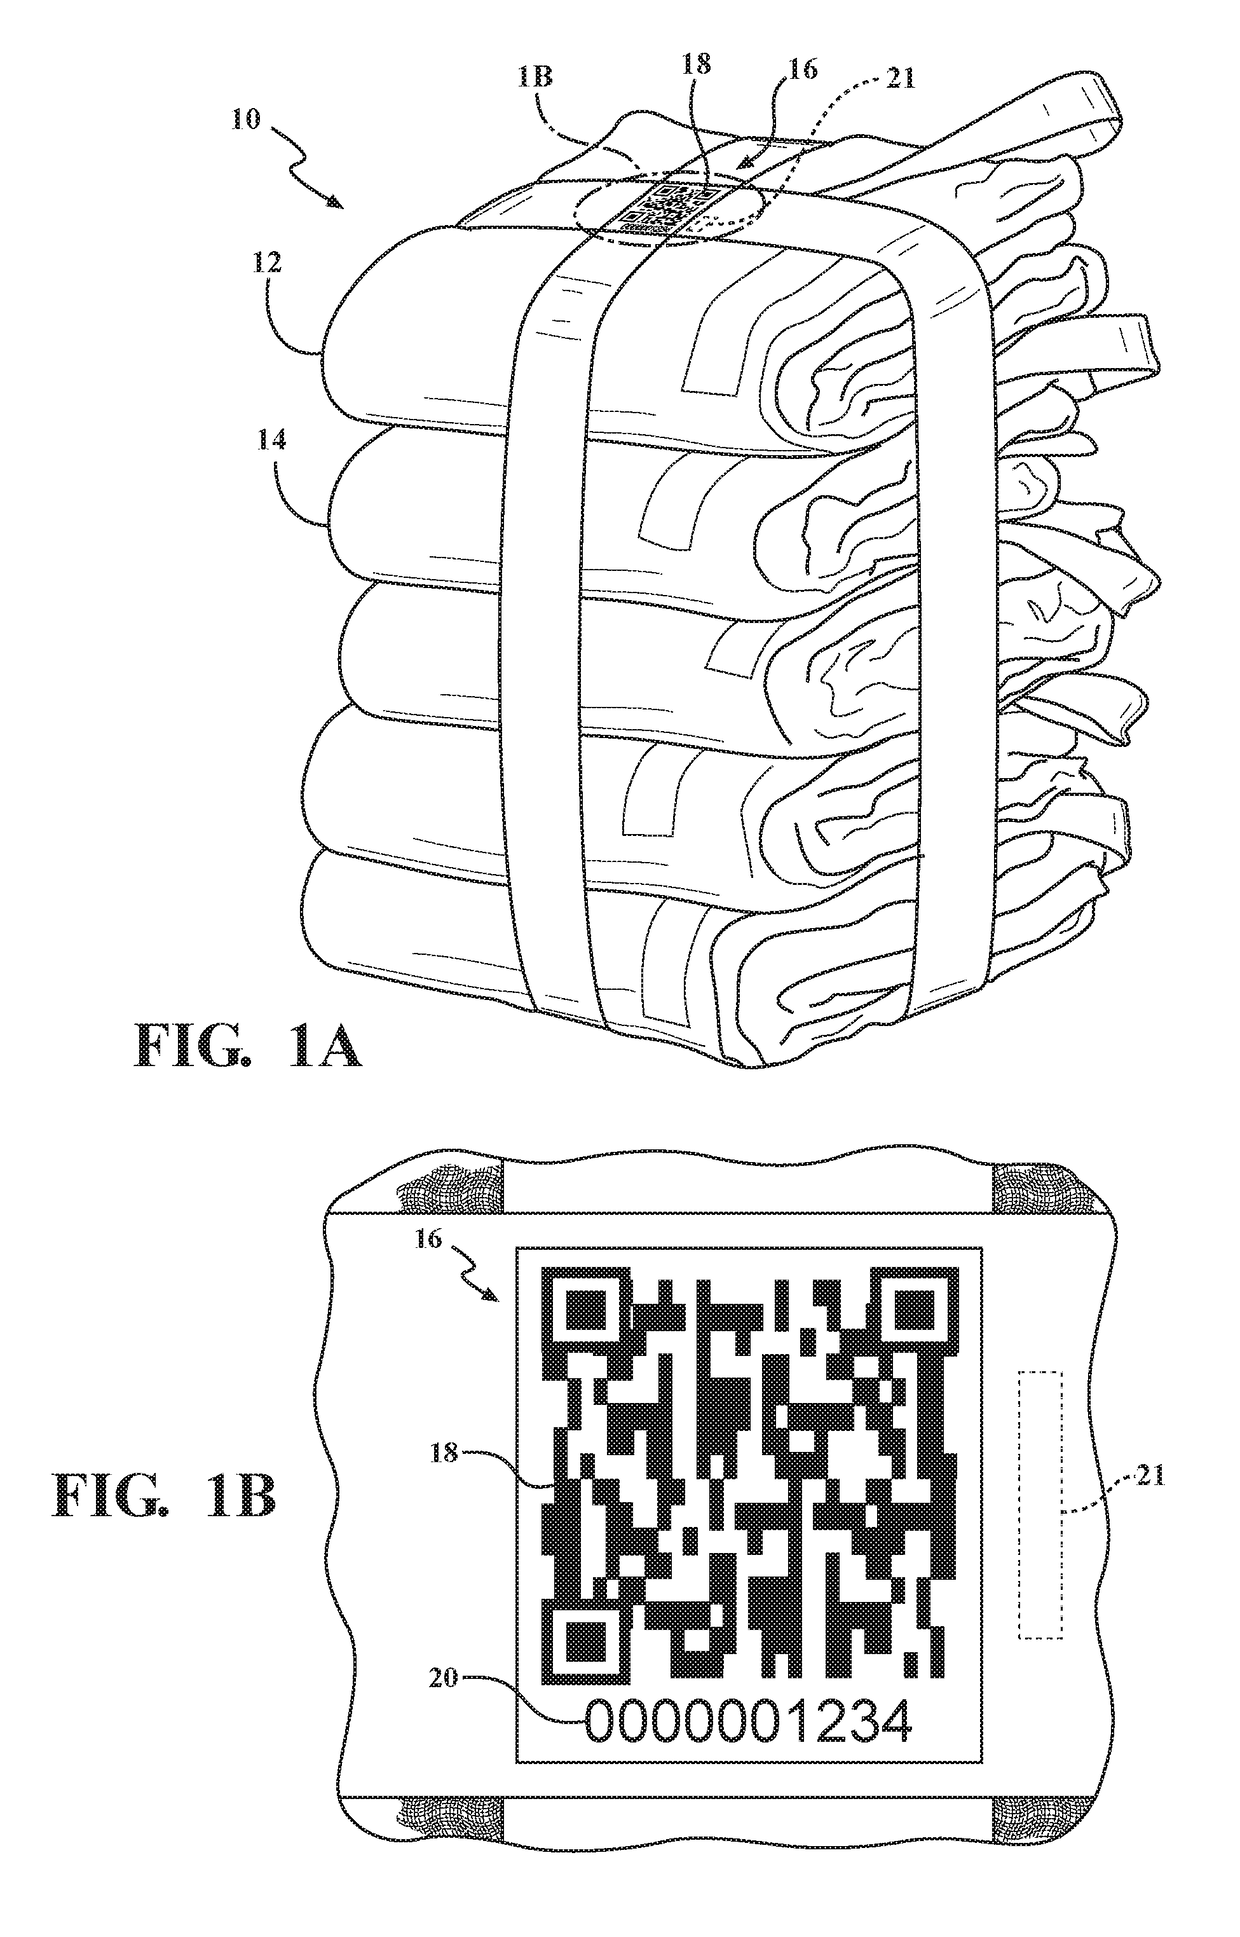 Surgical Article And Method For Managing Surgical Articles During A Surgical Procedure